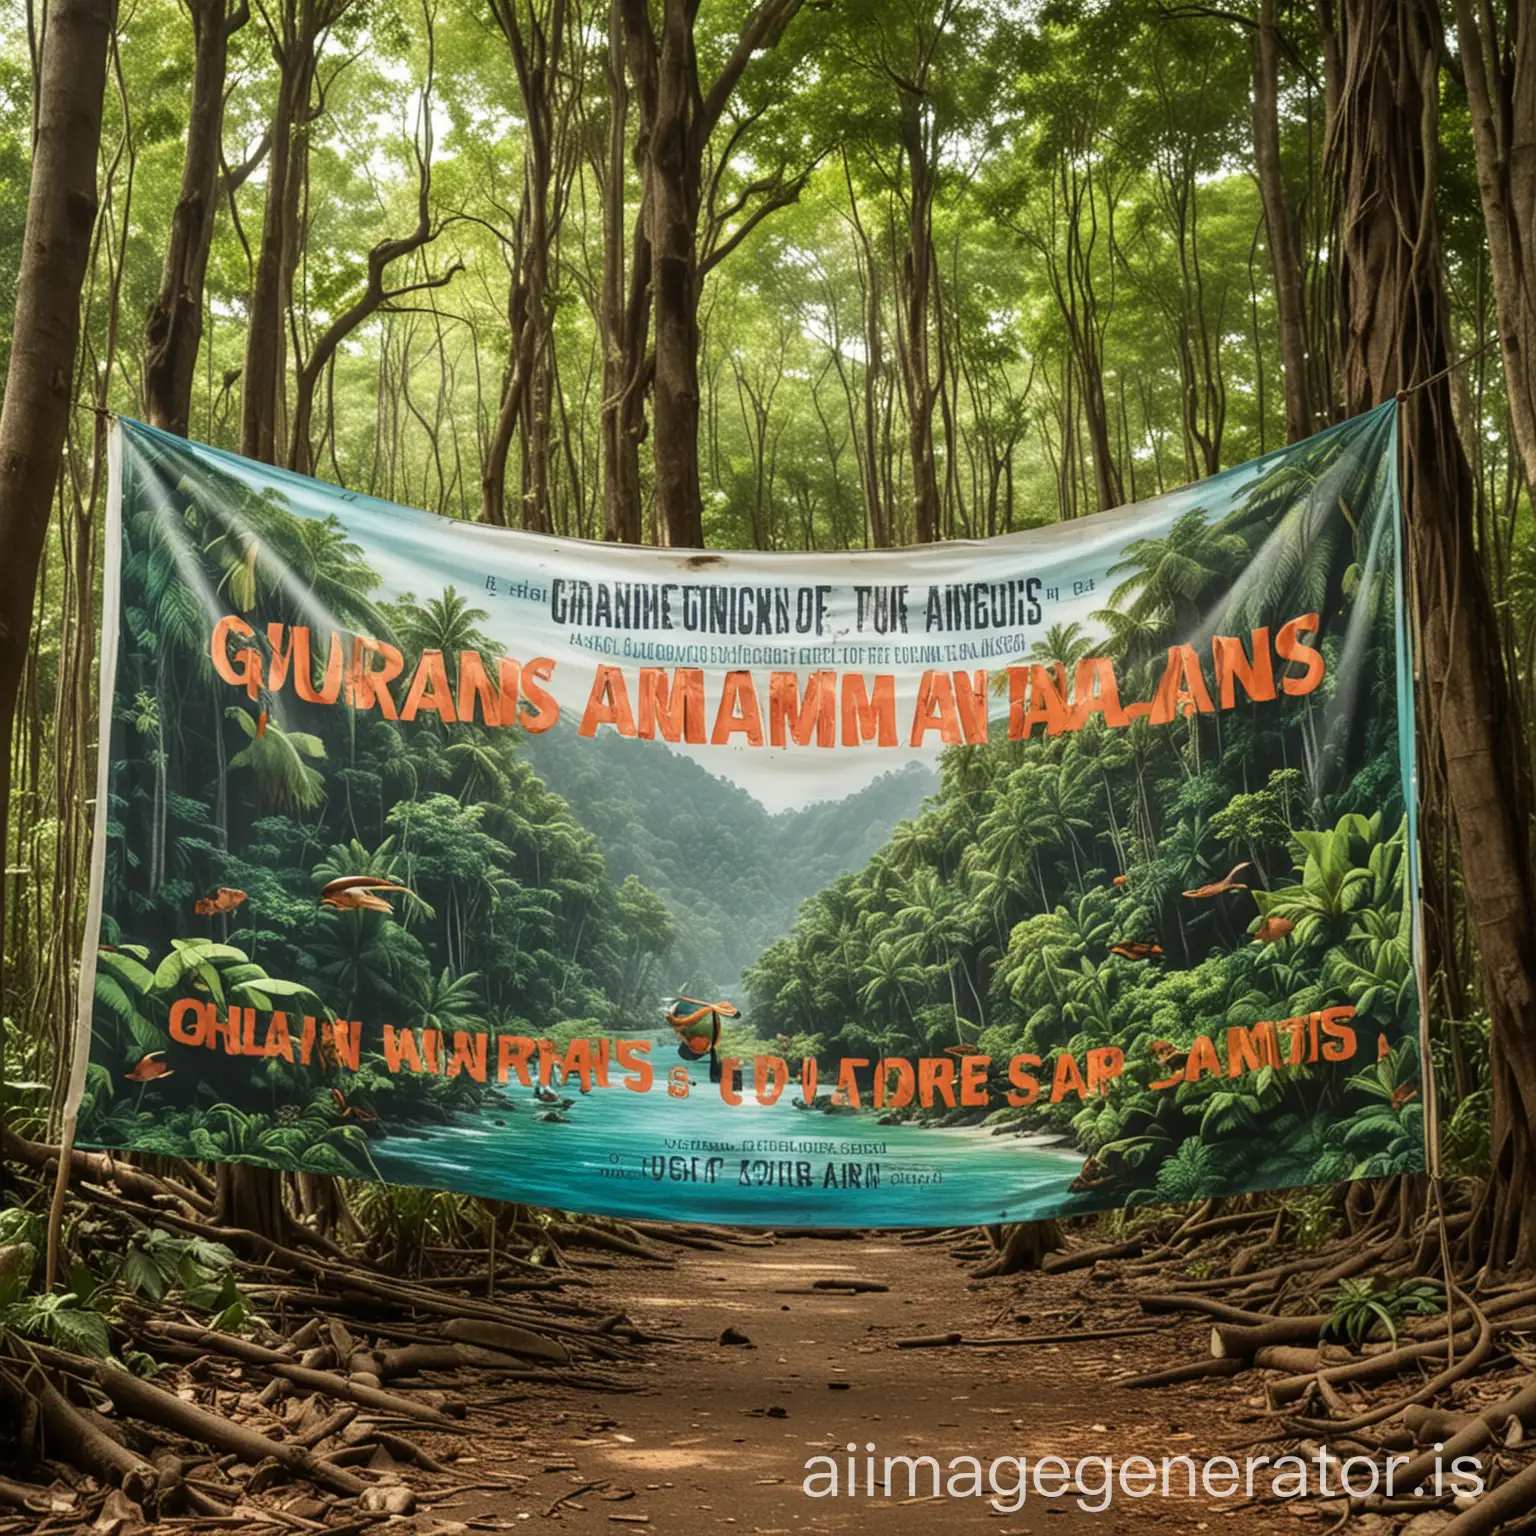 Scene of the beautiful Andaman and Nicobar Islands, lush forests, and vibrant coral reefs. A banner at the top reads: "Guardians of the Andaman and Nicobar Islands"